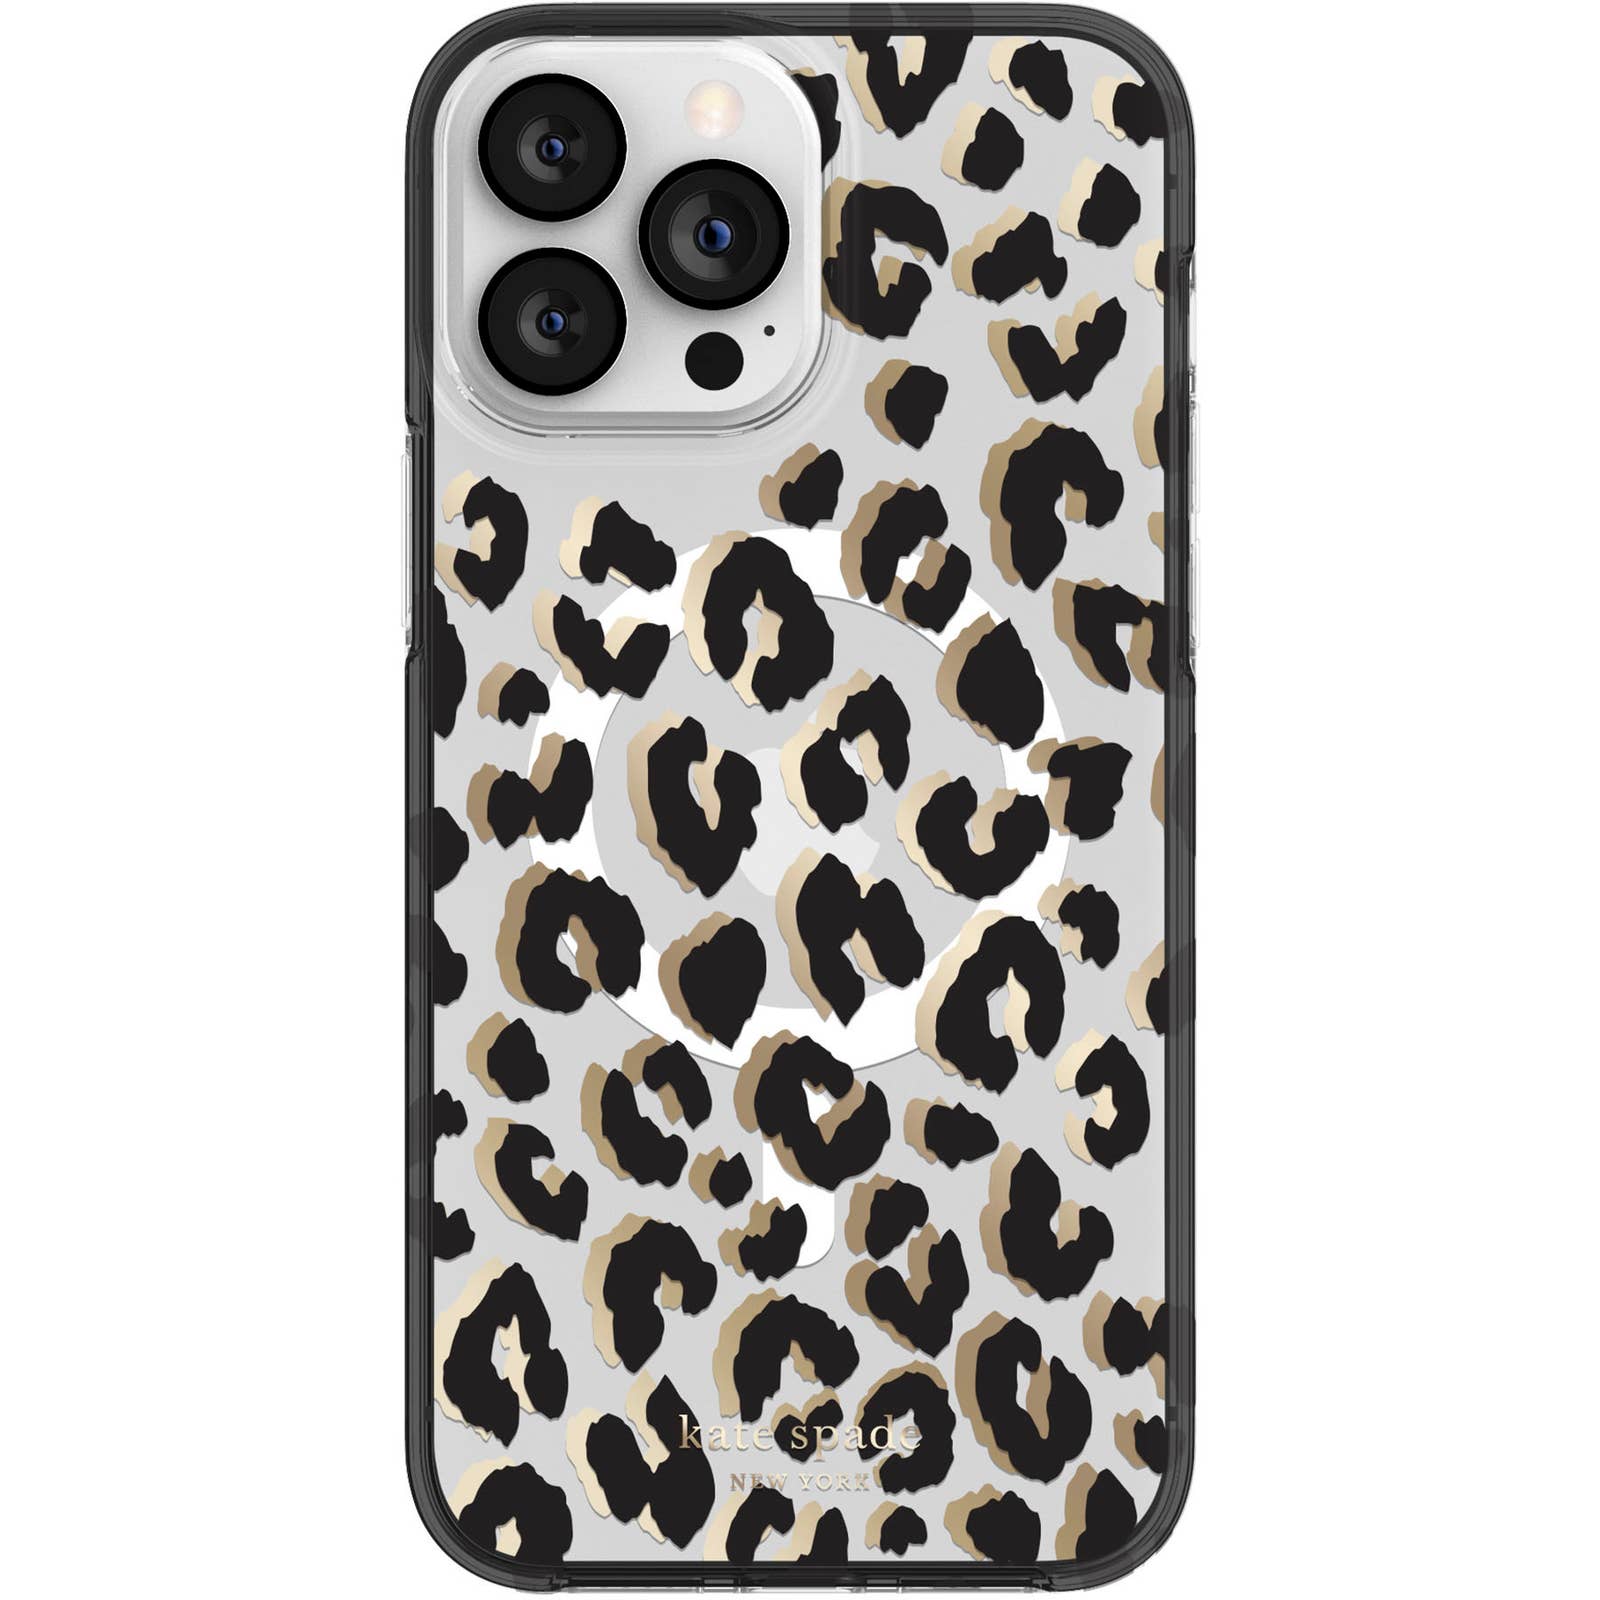 kate spade new york -KSIPH-207-CTLB/KSIPH-184-CHGO Protective Hardshell Magsafe Case for iPhone 13/12 Pro Max - Leopard/Champagne Glitter Ombre